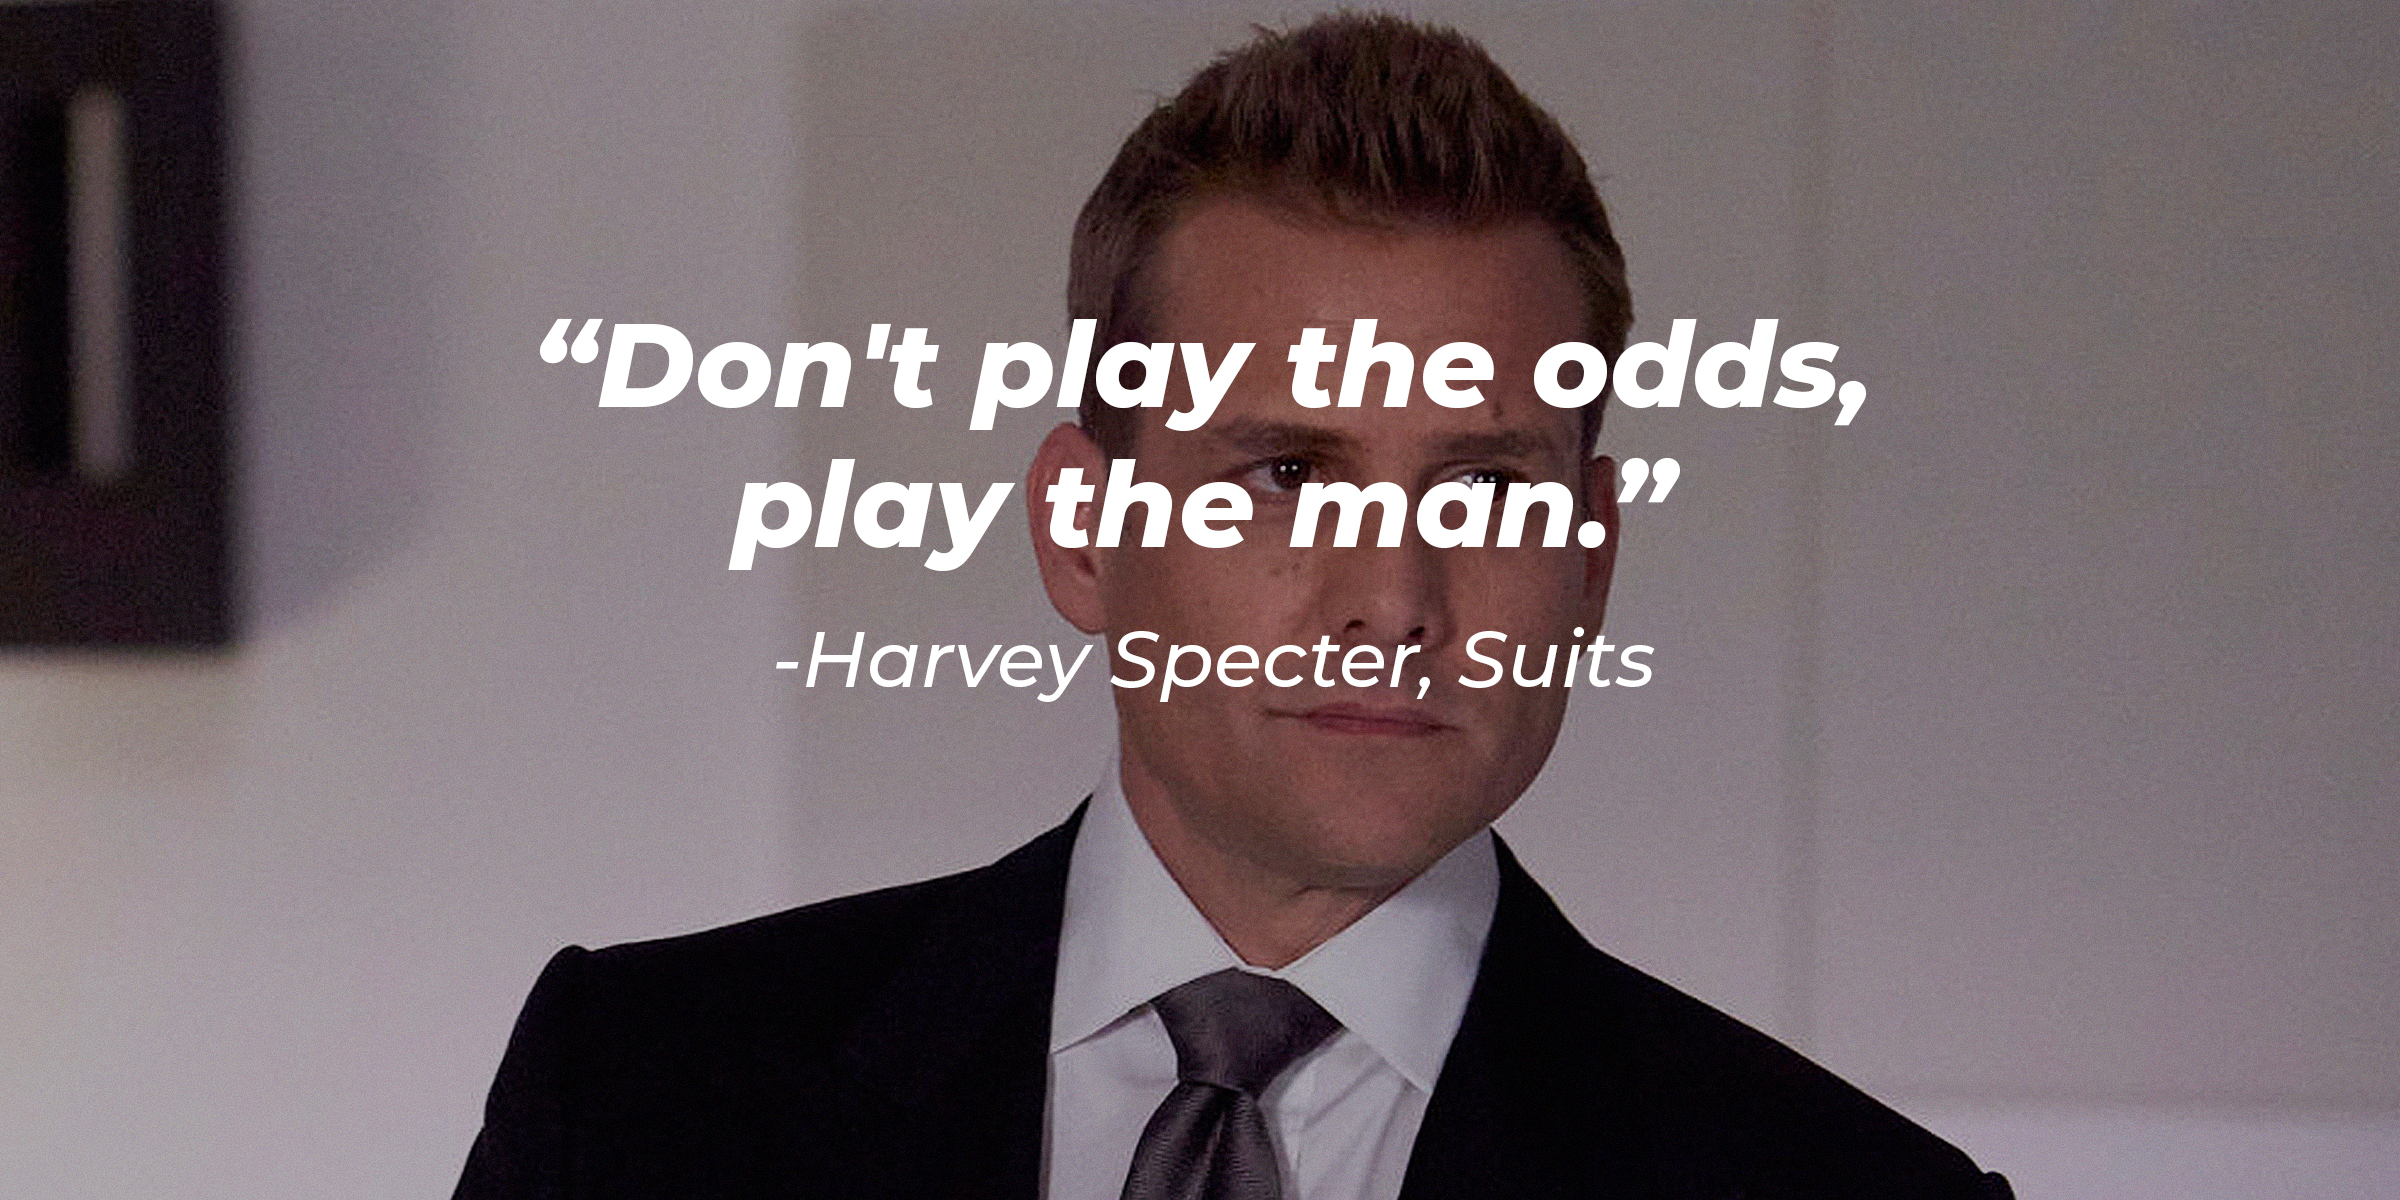 Harvey Specter with his quote: "Don't play the odds, play the man." | Source: facebook.com/SuitsPeacock